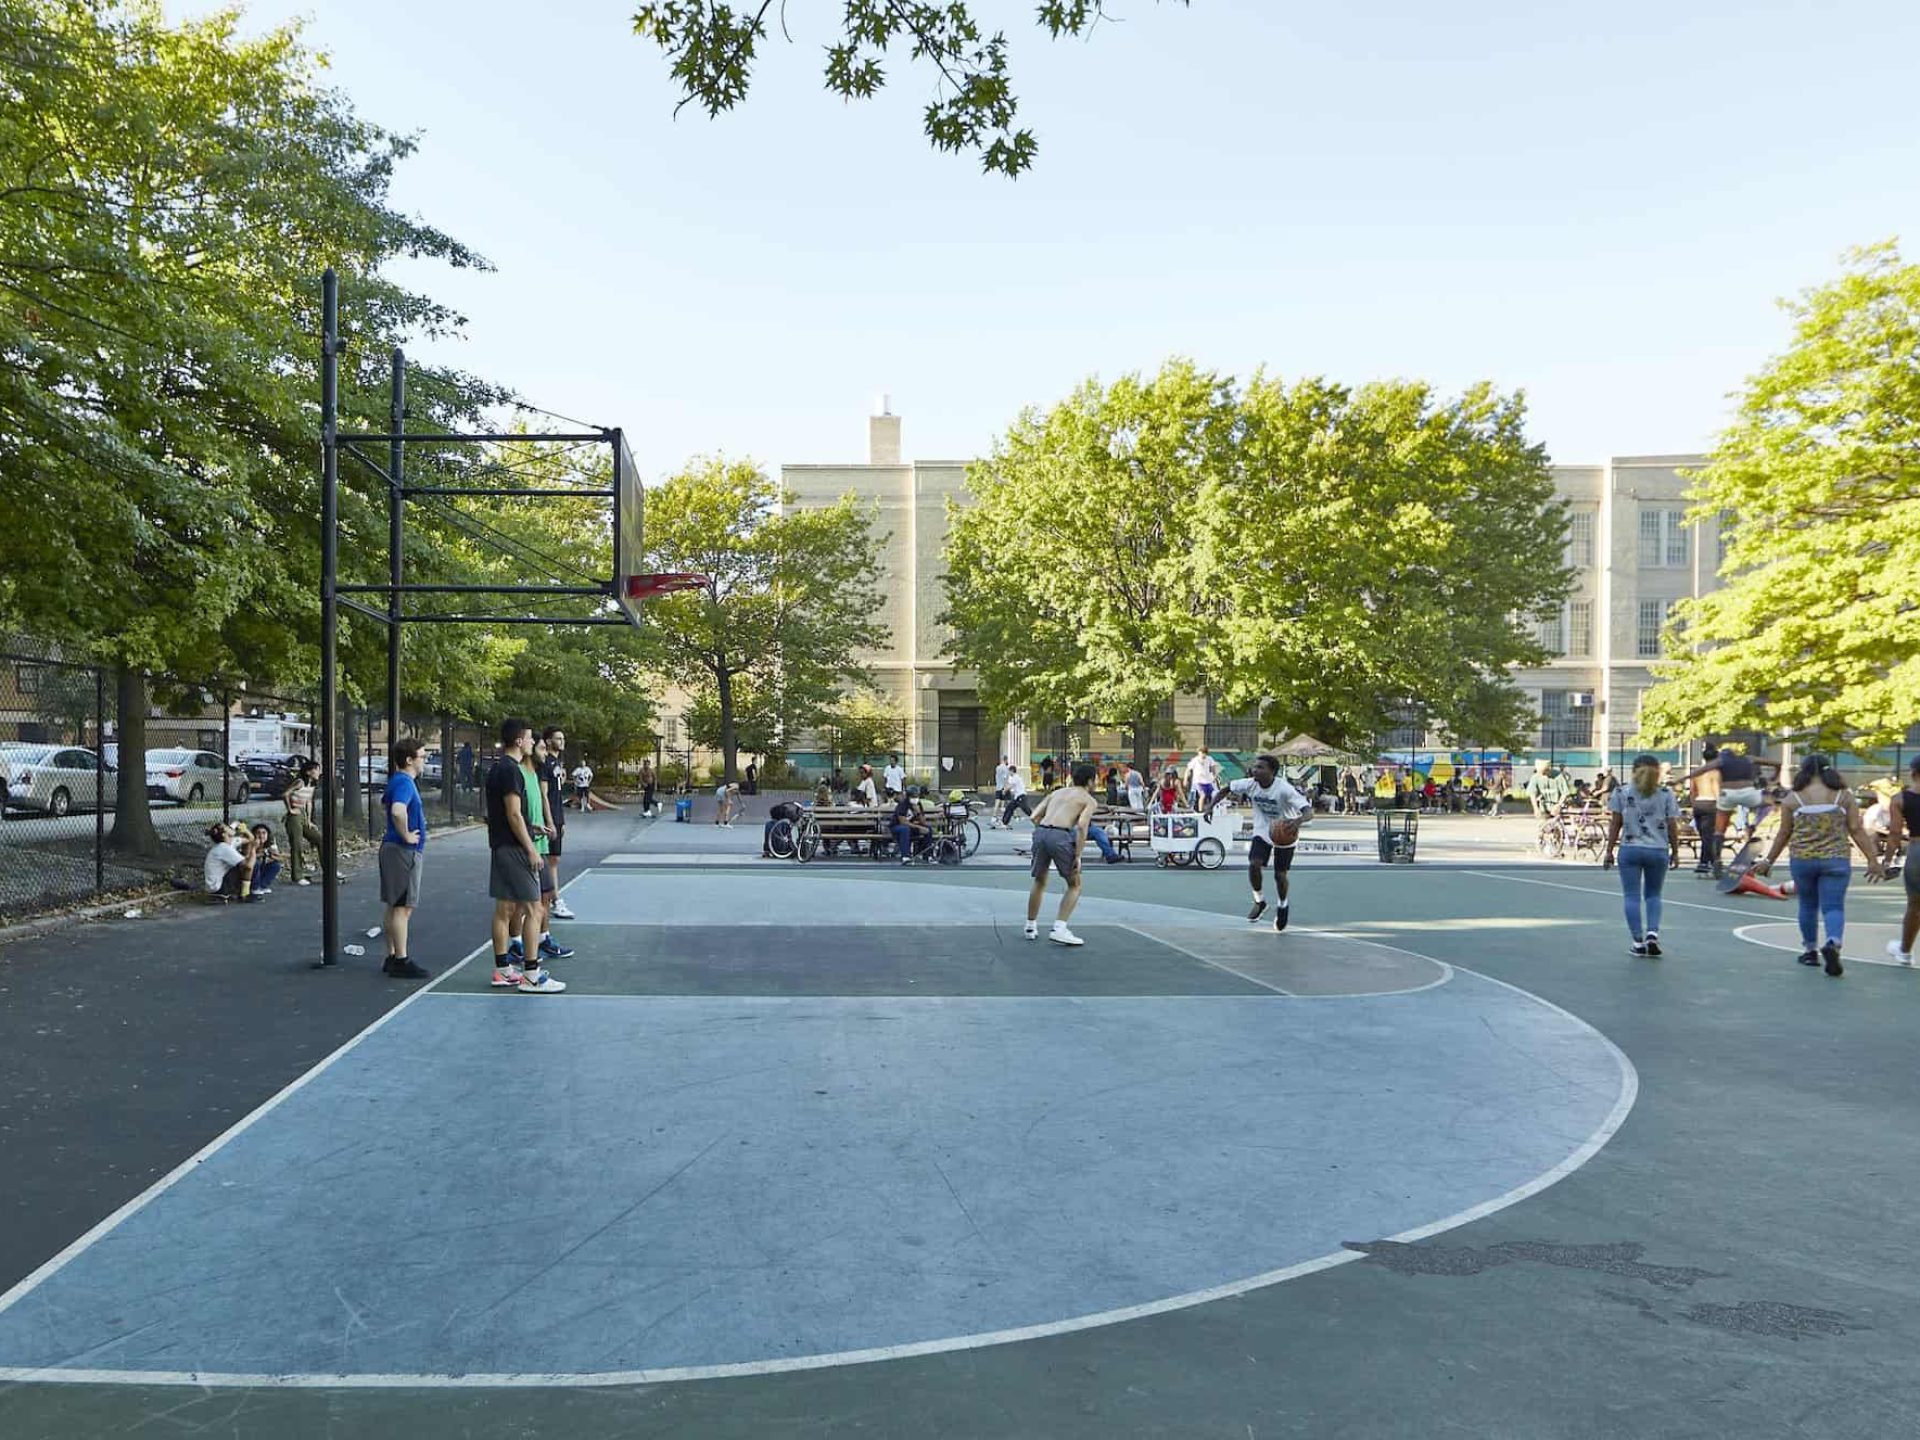 Basketball courts in the Williamsburg neighborhood with people playing basketball and courts bordered with a fence and trees.